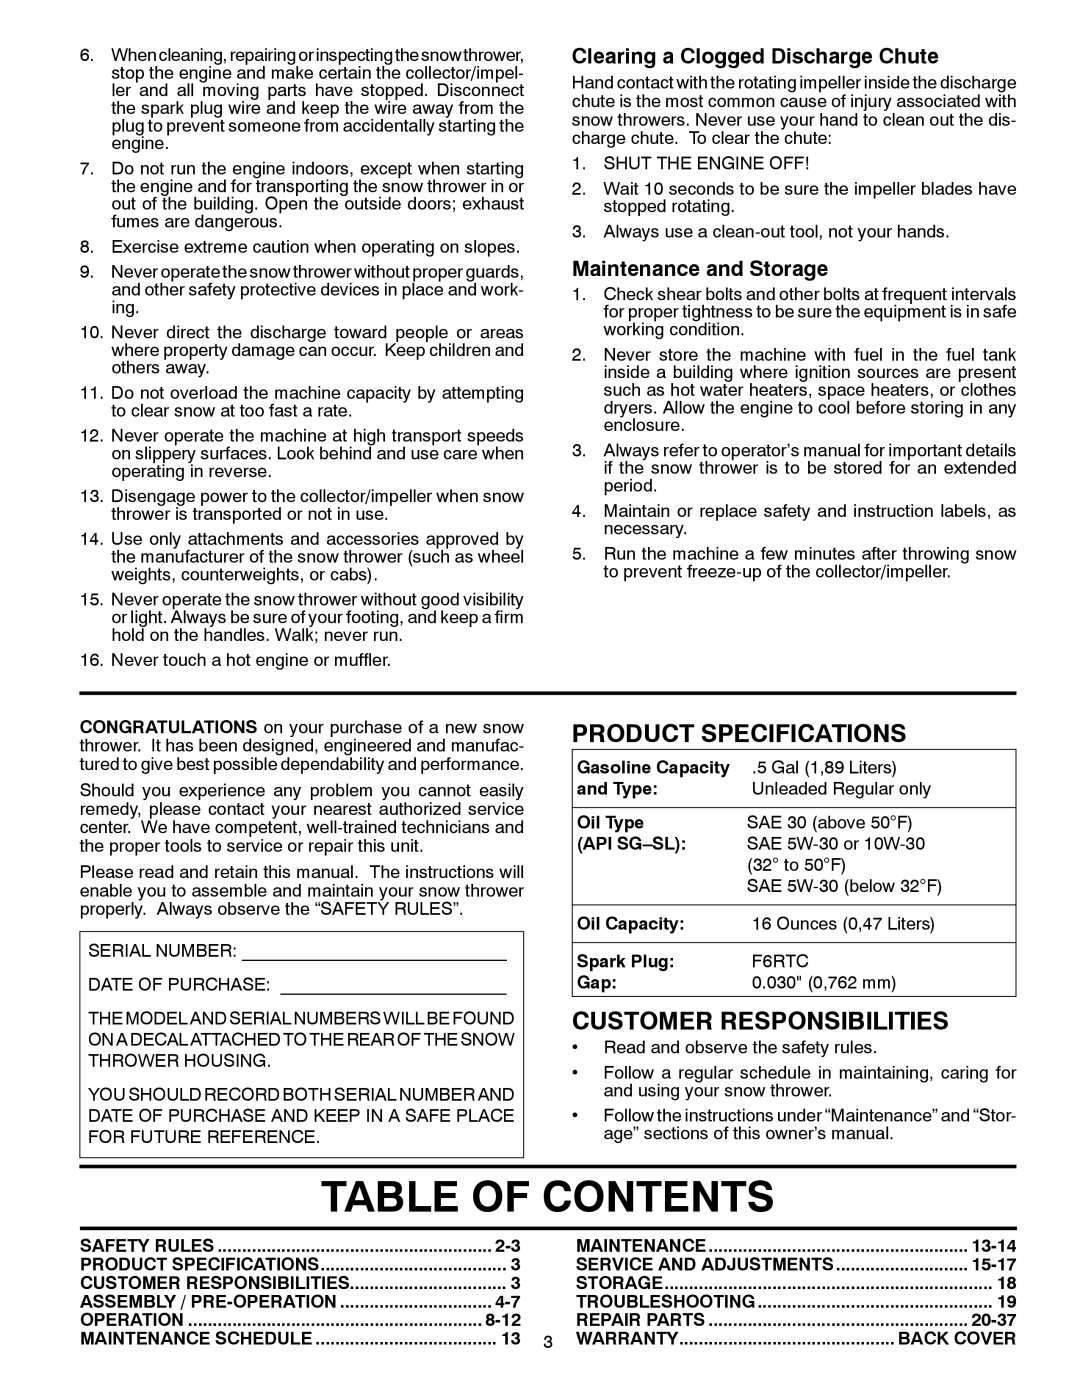 McCulloch 96192004102 Table Of Contents, Product Specifications, Customer Responsibilities, Maintenance and Storage, 13-14 